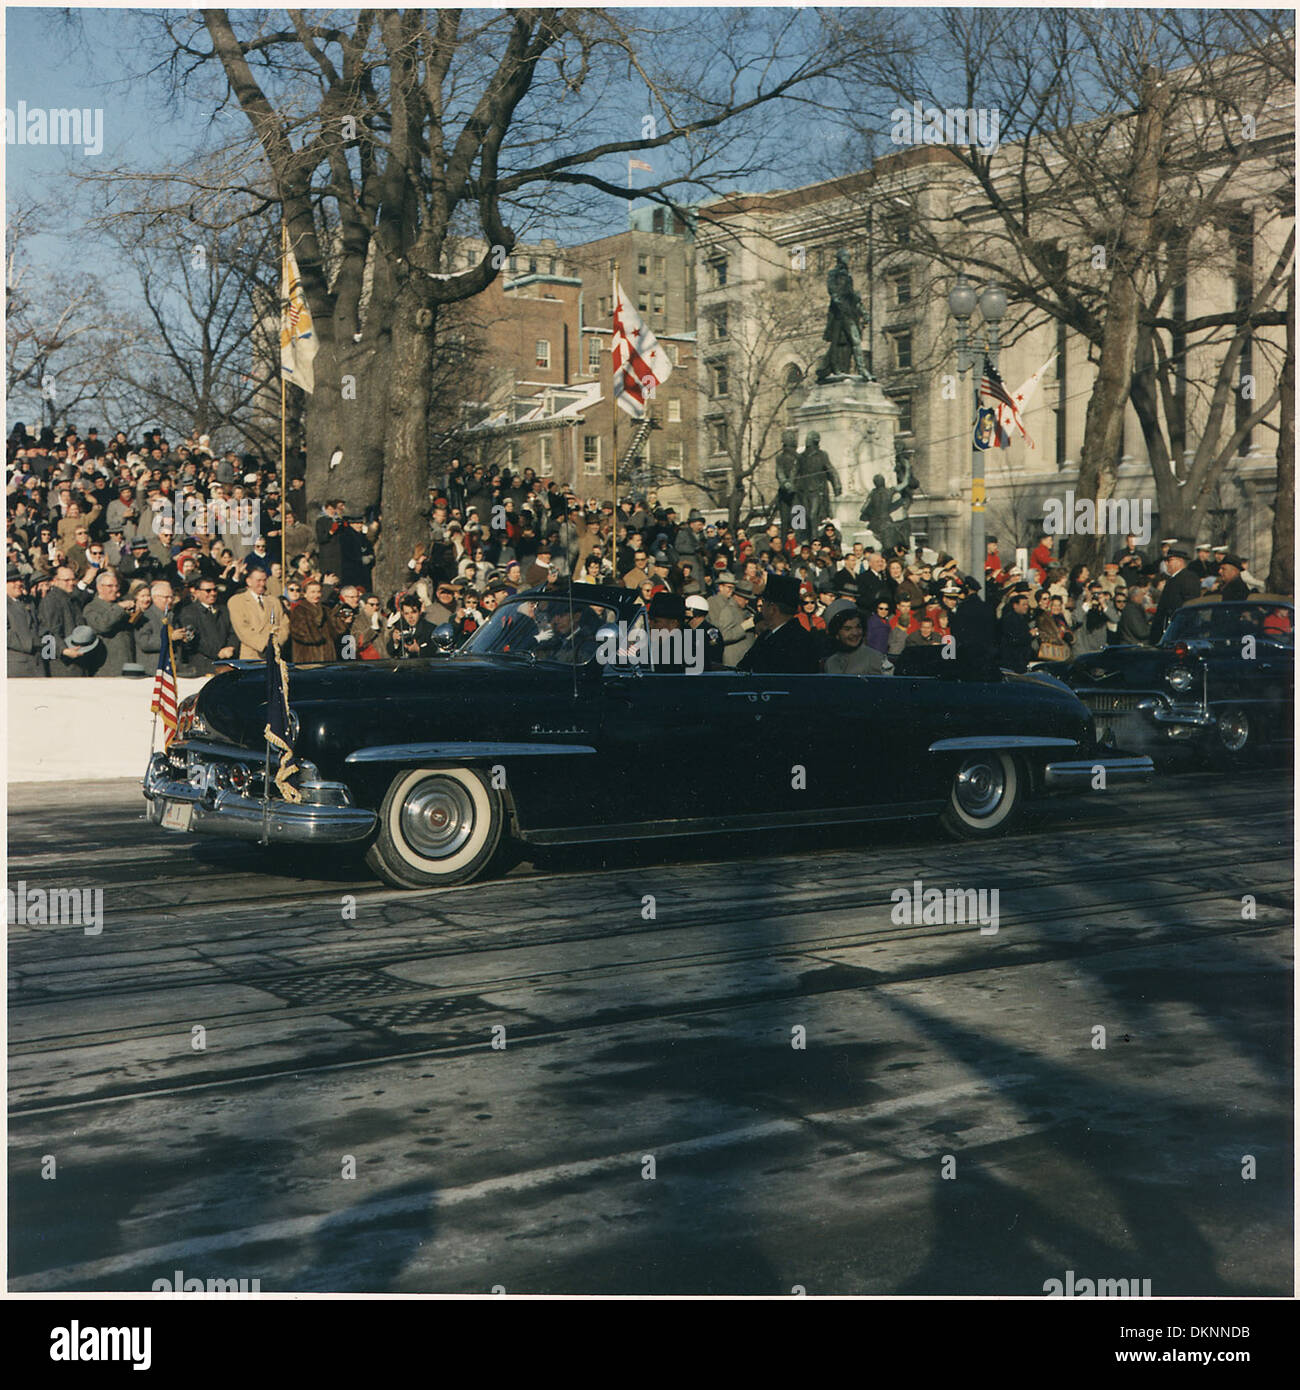 Inaugural Parade. President and First Lady in Limousine, spectators. Washington, D.C., Pennsylvania Ave. 194223 Stock Photo